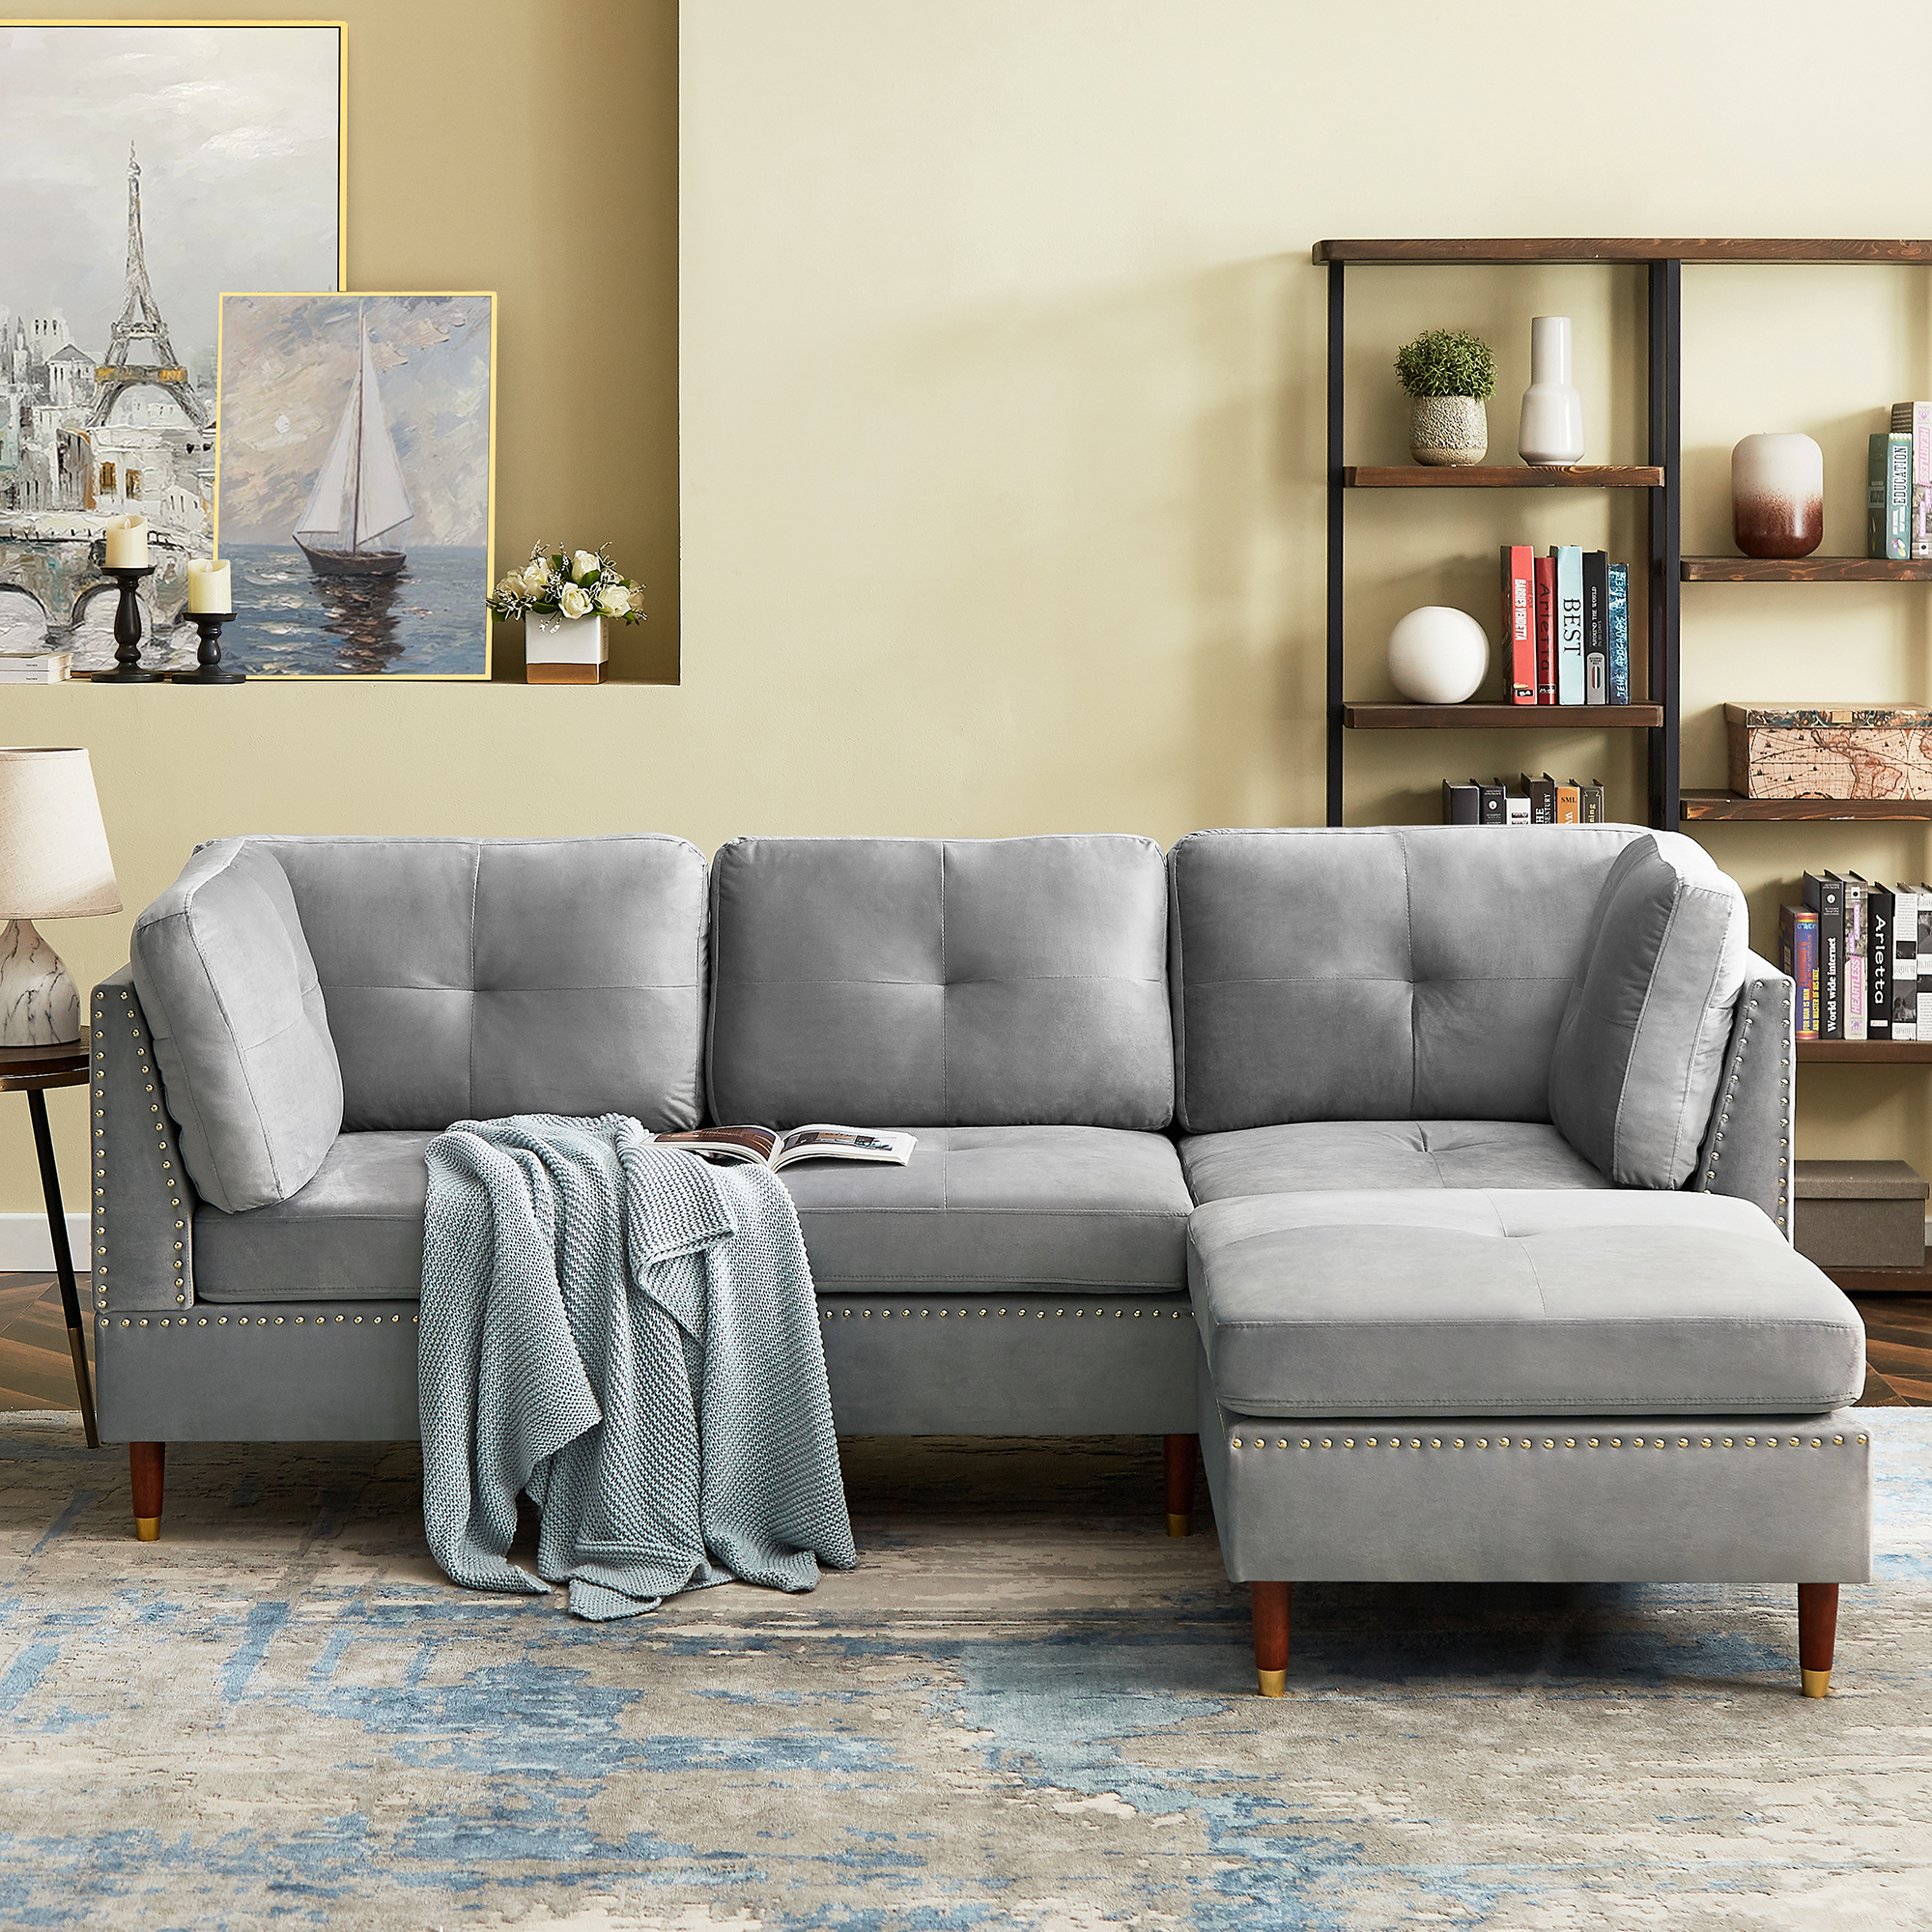 Sectional Sofa Couch with Ottoman, Modern L-Shaped Couch with Nail Head for Apartment and Living Room.-Boyel Living